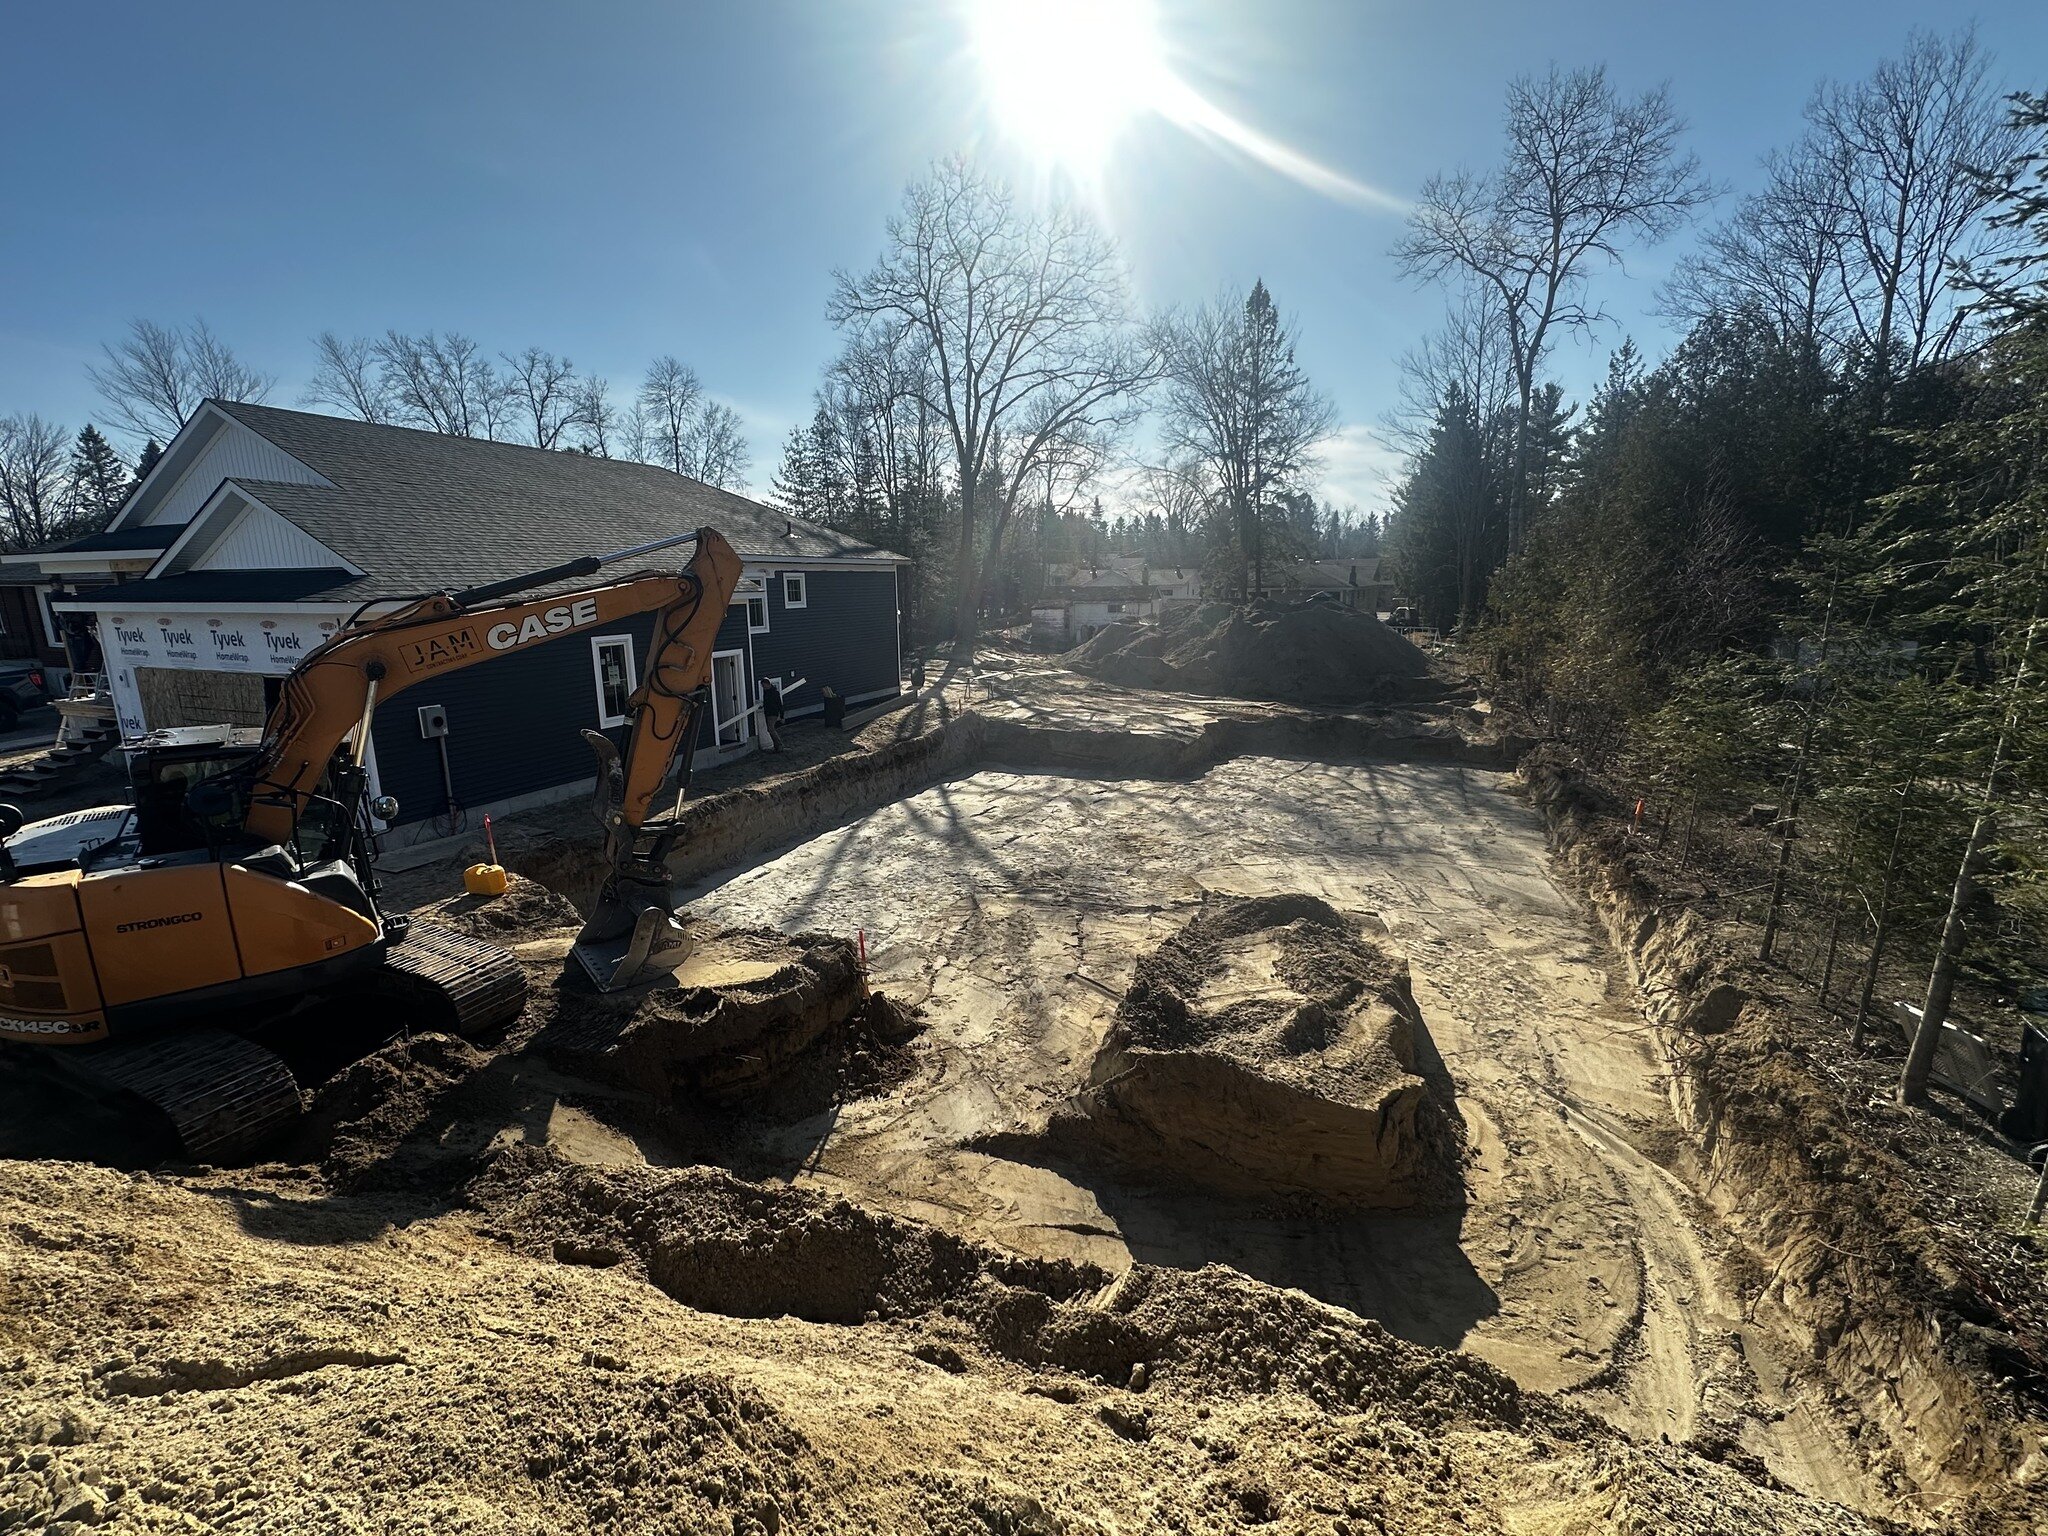 Another excavation done by @JAM! Footings are in, time for the walls to go up! ⬆️
.
.
.
.
.
.
 #newconstruction #customhomebuilders #custombuild #construction #custom #custombuilder #customhome #customhomebuild #newhomeconstruction #customhomebuildin